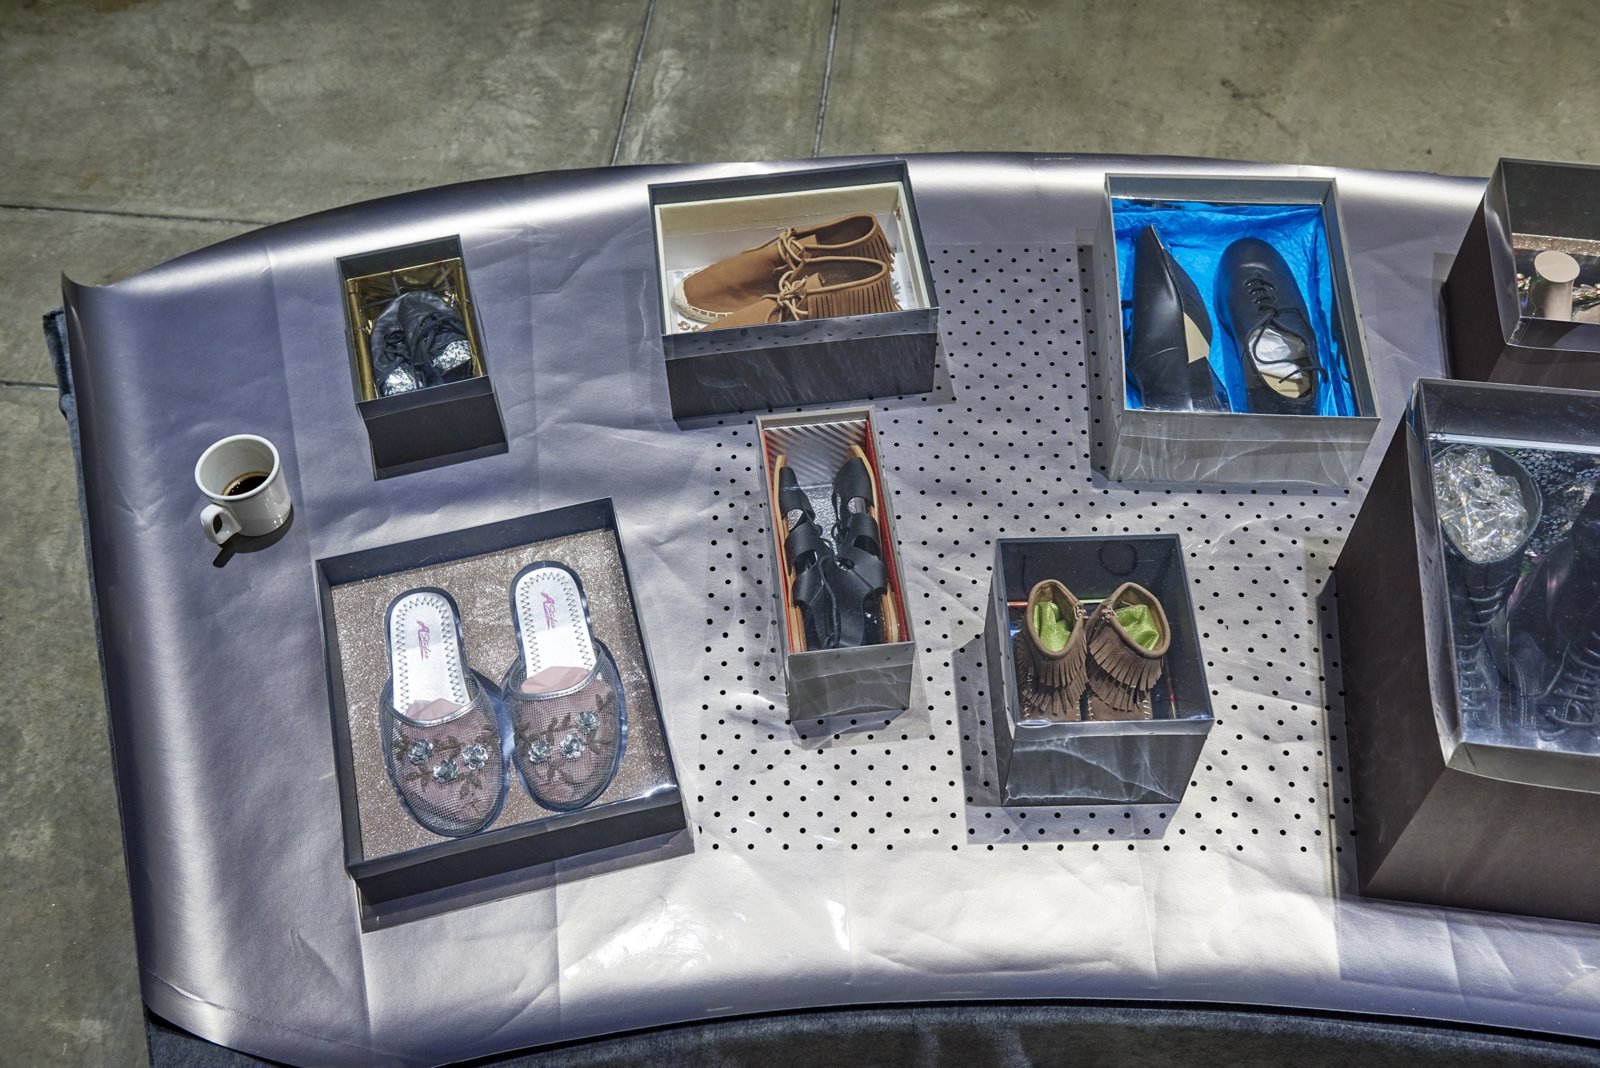 Liz Magor, Shoe World (detail), 2018, 33 pairs of secondhand shoes, mat-board shoeboxes of variable dimensions with polyester film lids, porcelain mug, coffee, and plywood platform with fabric cover, 12 x 288 x 40 in. (31 x 732 x 102 cm). Installation view, BLOWOUT, Carpenter Center for Visual Arts, Cambridge, USA